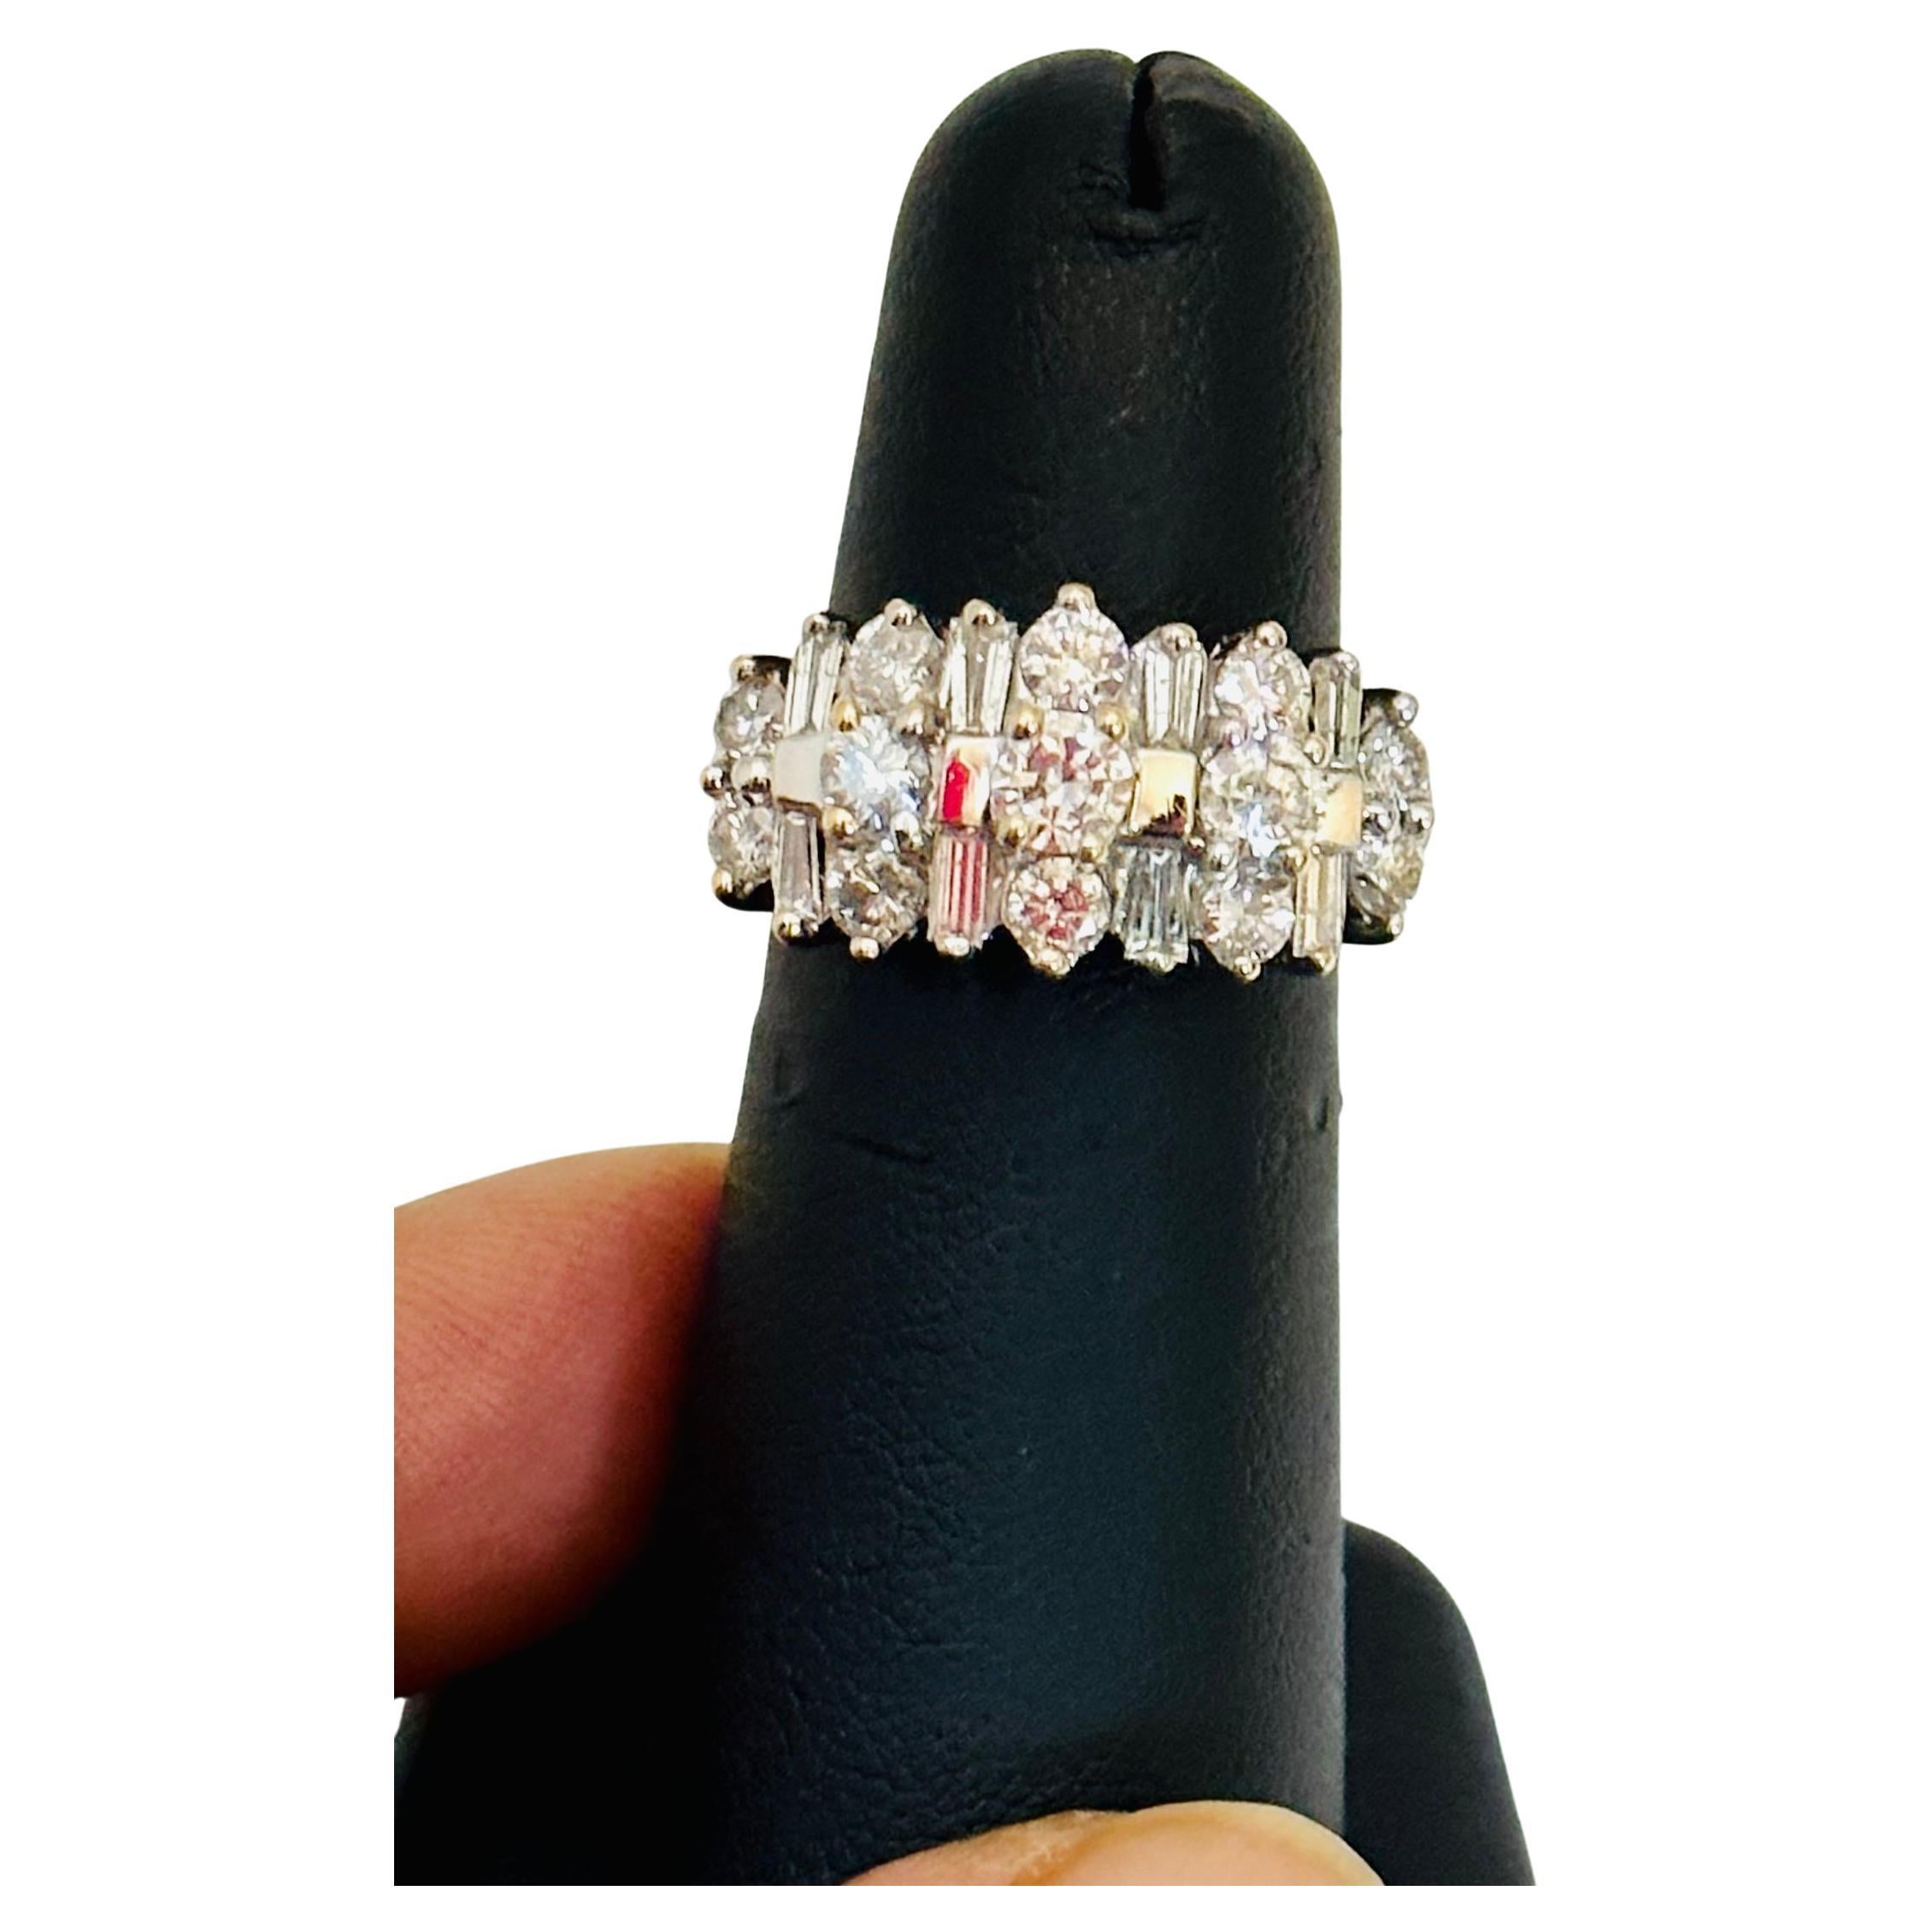 beautiful estate piece
Big size round diamonds alternating with Baguettes are making this beautiful ring.
14 Karat White Gold 6.8 gm
Size 6
Very clean and shiny diamonds.
Total Diamond weight approximately 2.8 ct.
This is a Engagement band  from our